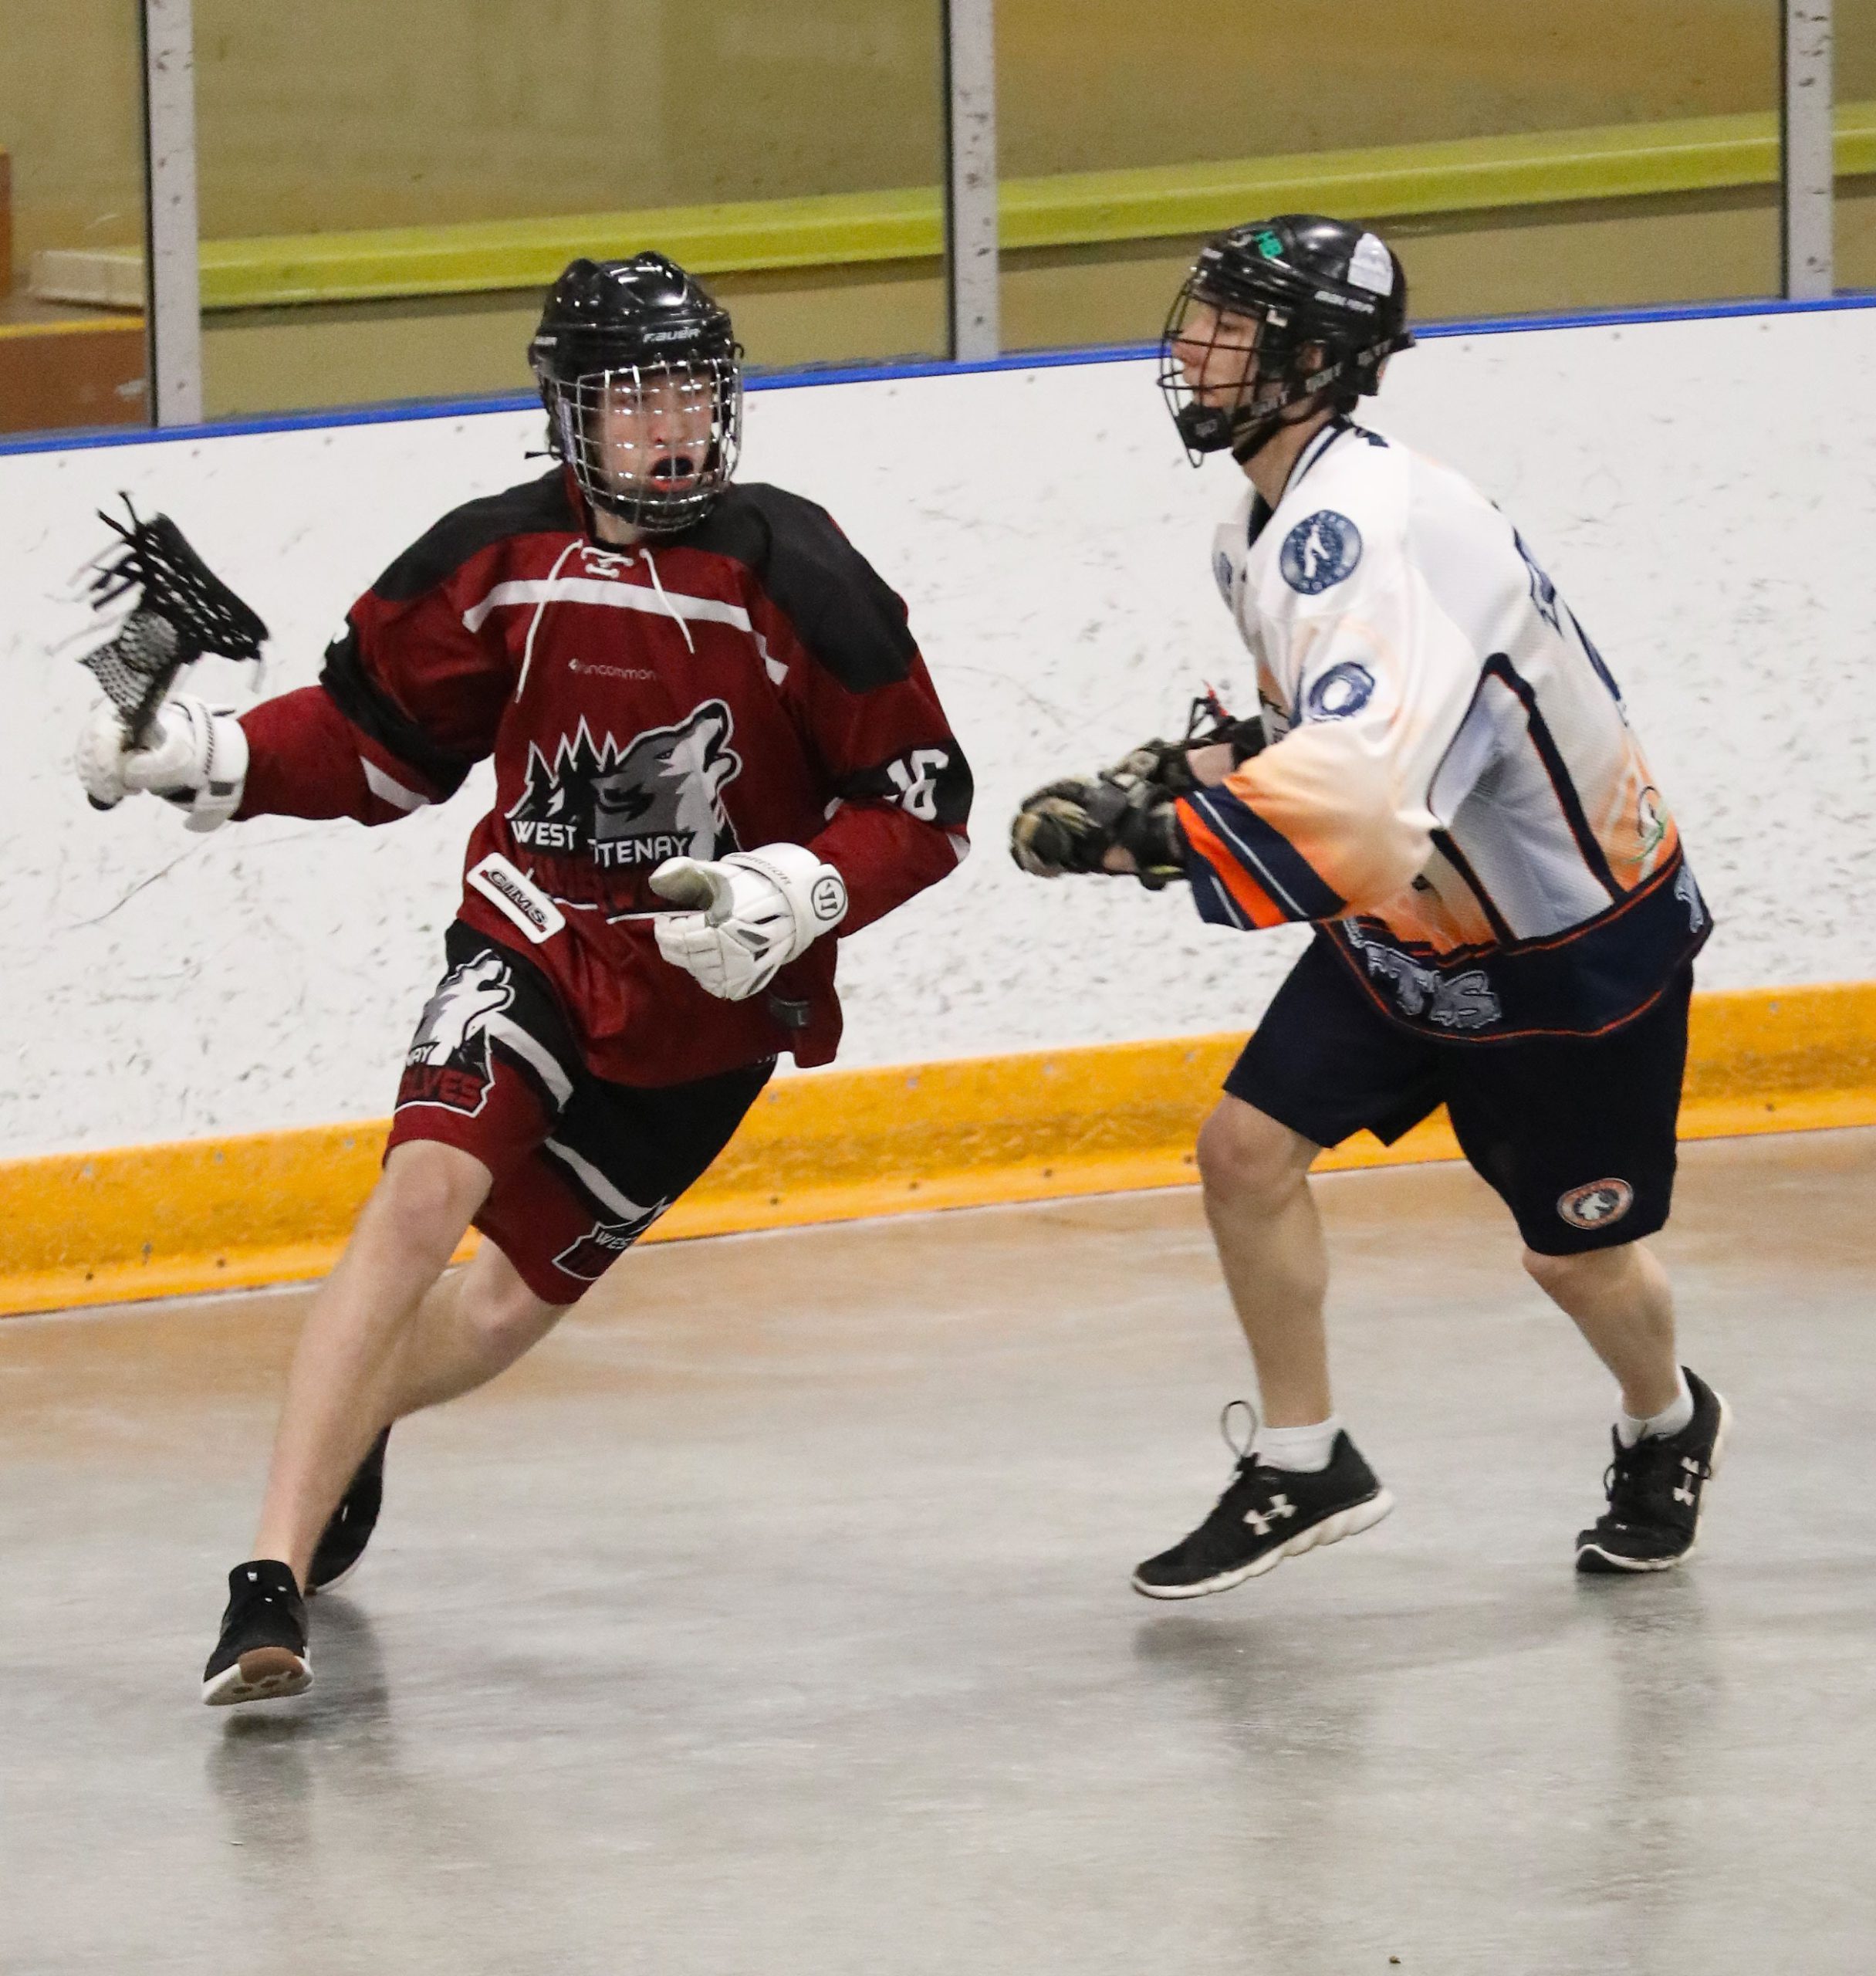 Player Registration is Open for The West Kootenay Timberwolves Lacrosse Team